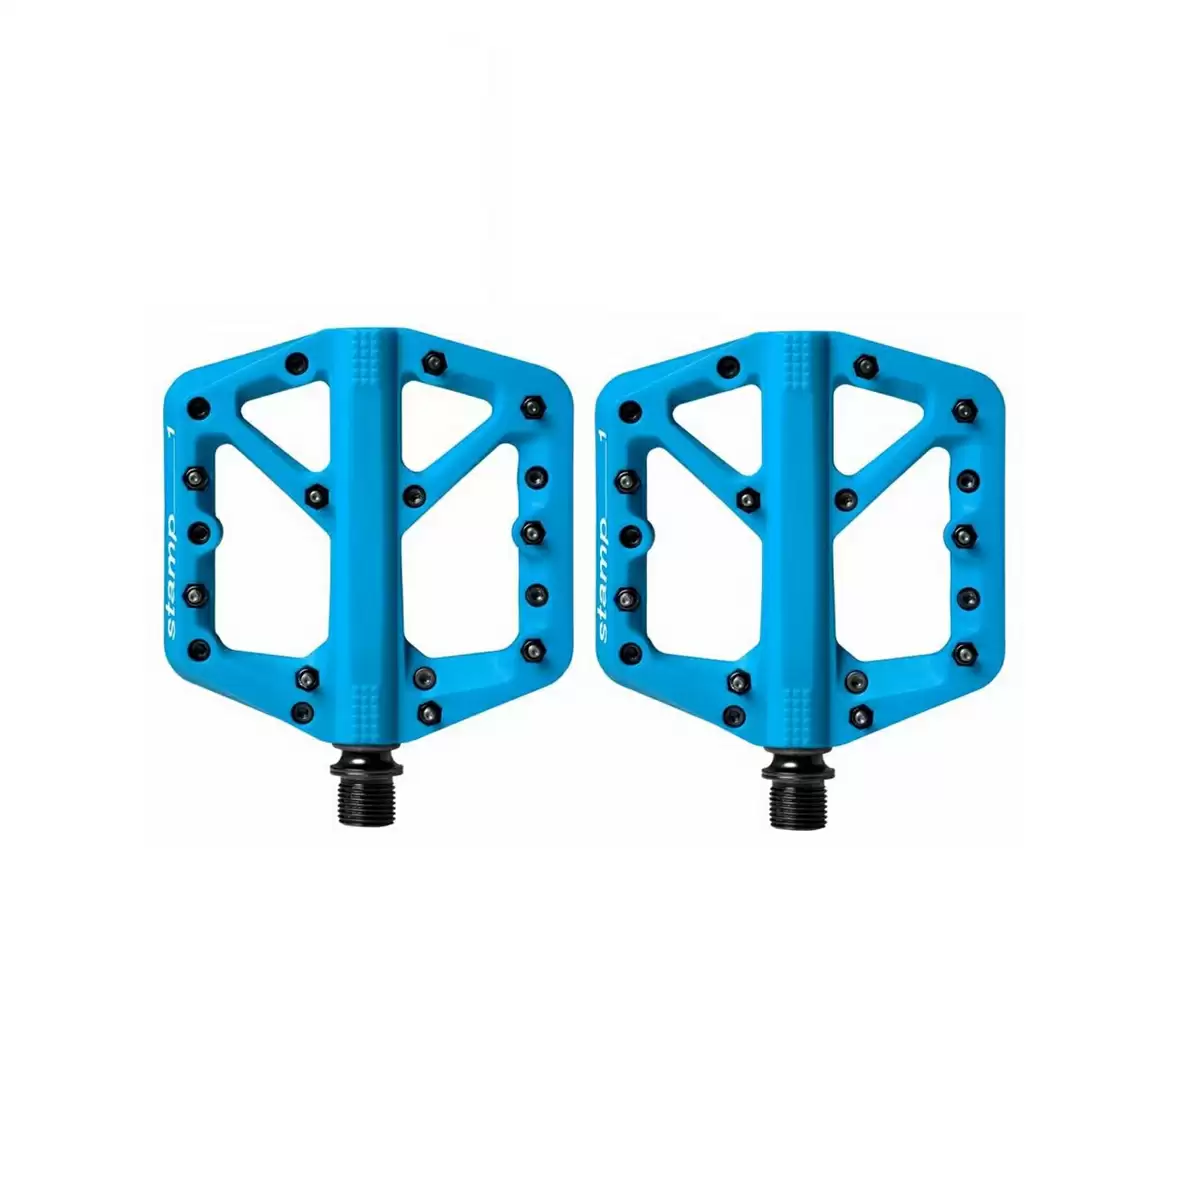 Pair of pedals Stamp 1 Small blue - image